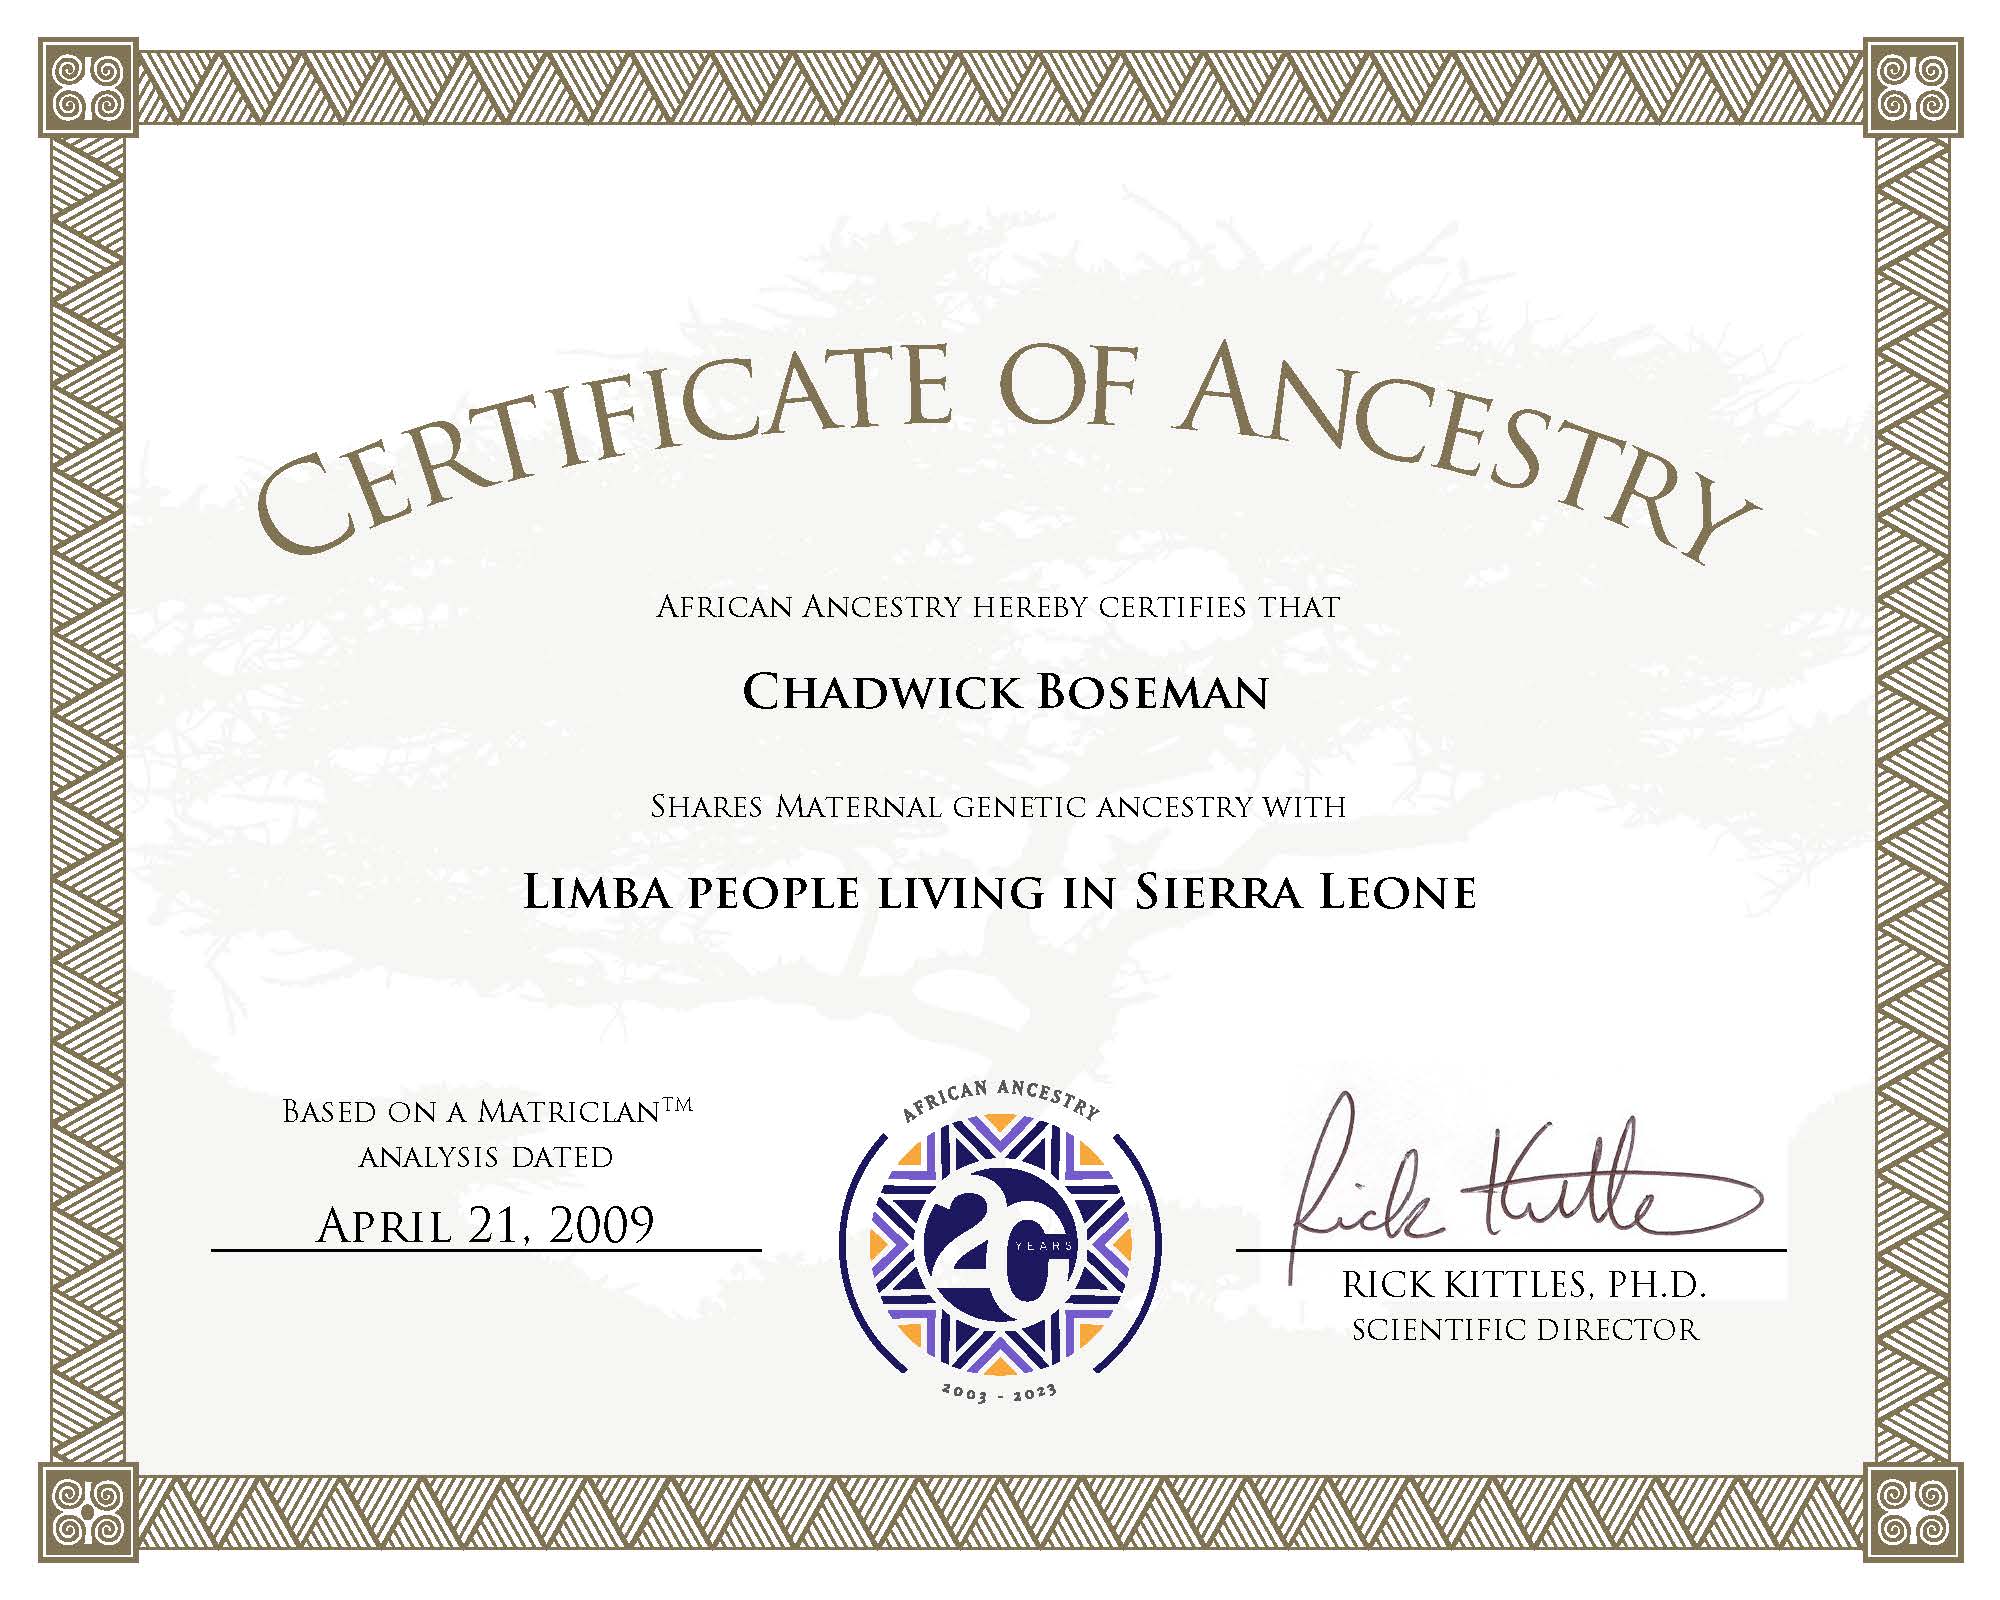 Printed Certificates for You and Family Members - African Ancestry